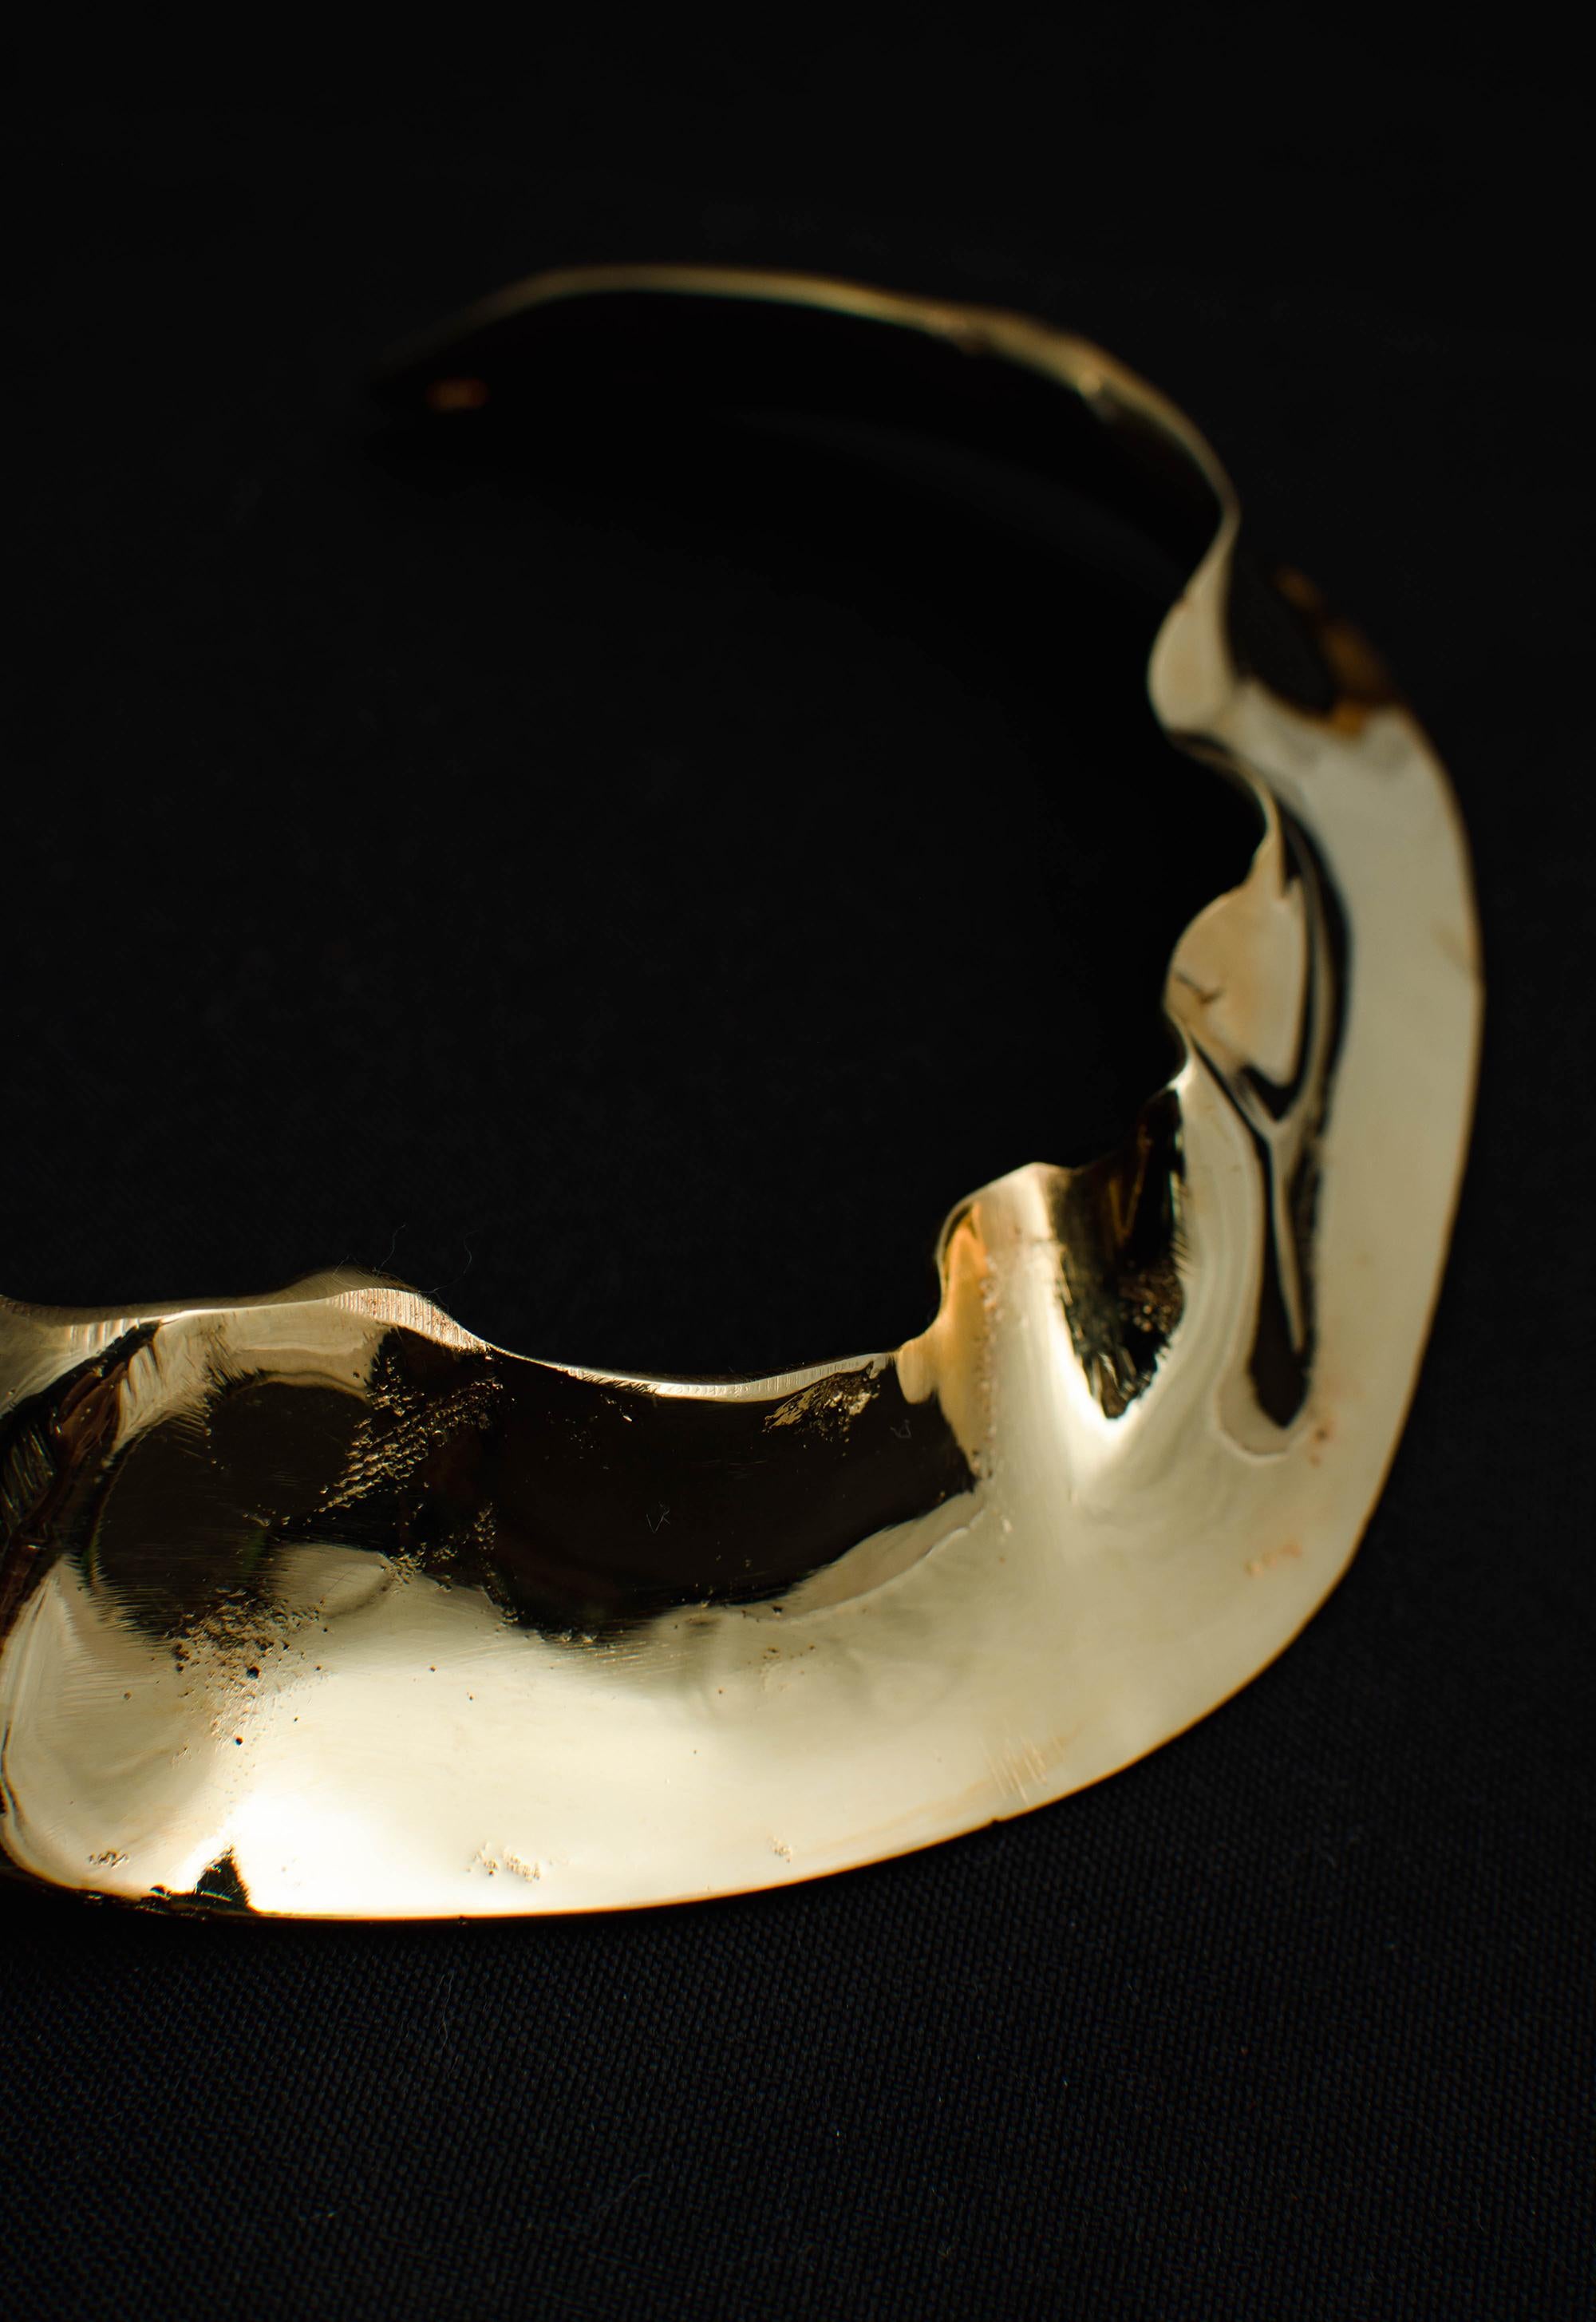 This piece was designed, hand-carved and then cast in brass from our workshop Uruguay. The brass used in this manufacturing process is fully recycled. Each piece is then finished by hand with care and love.
Brass 24k gold plated
5.5